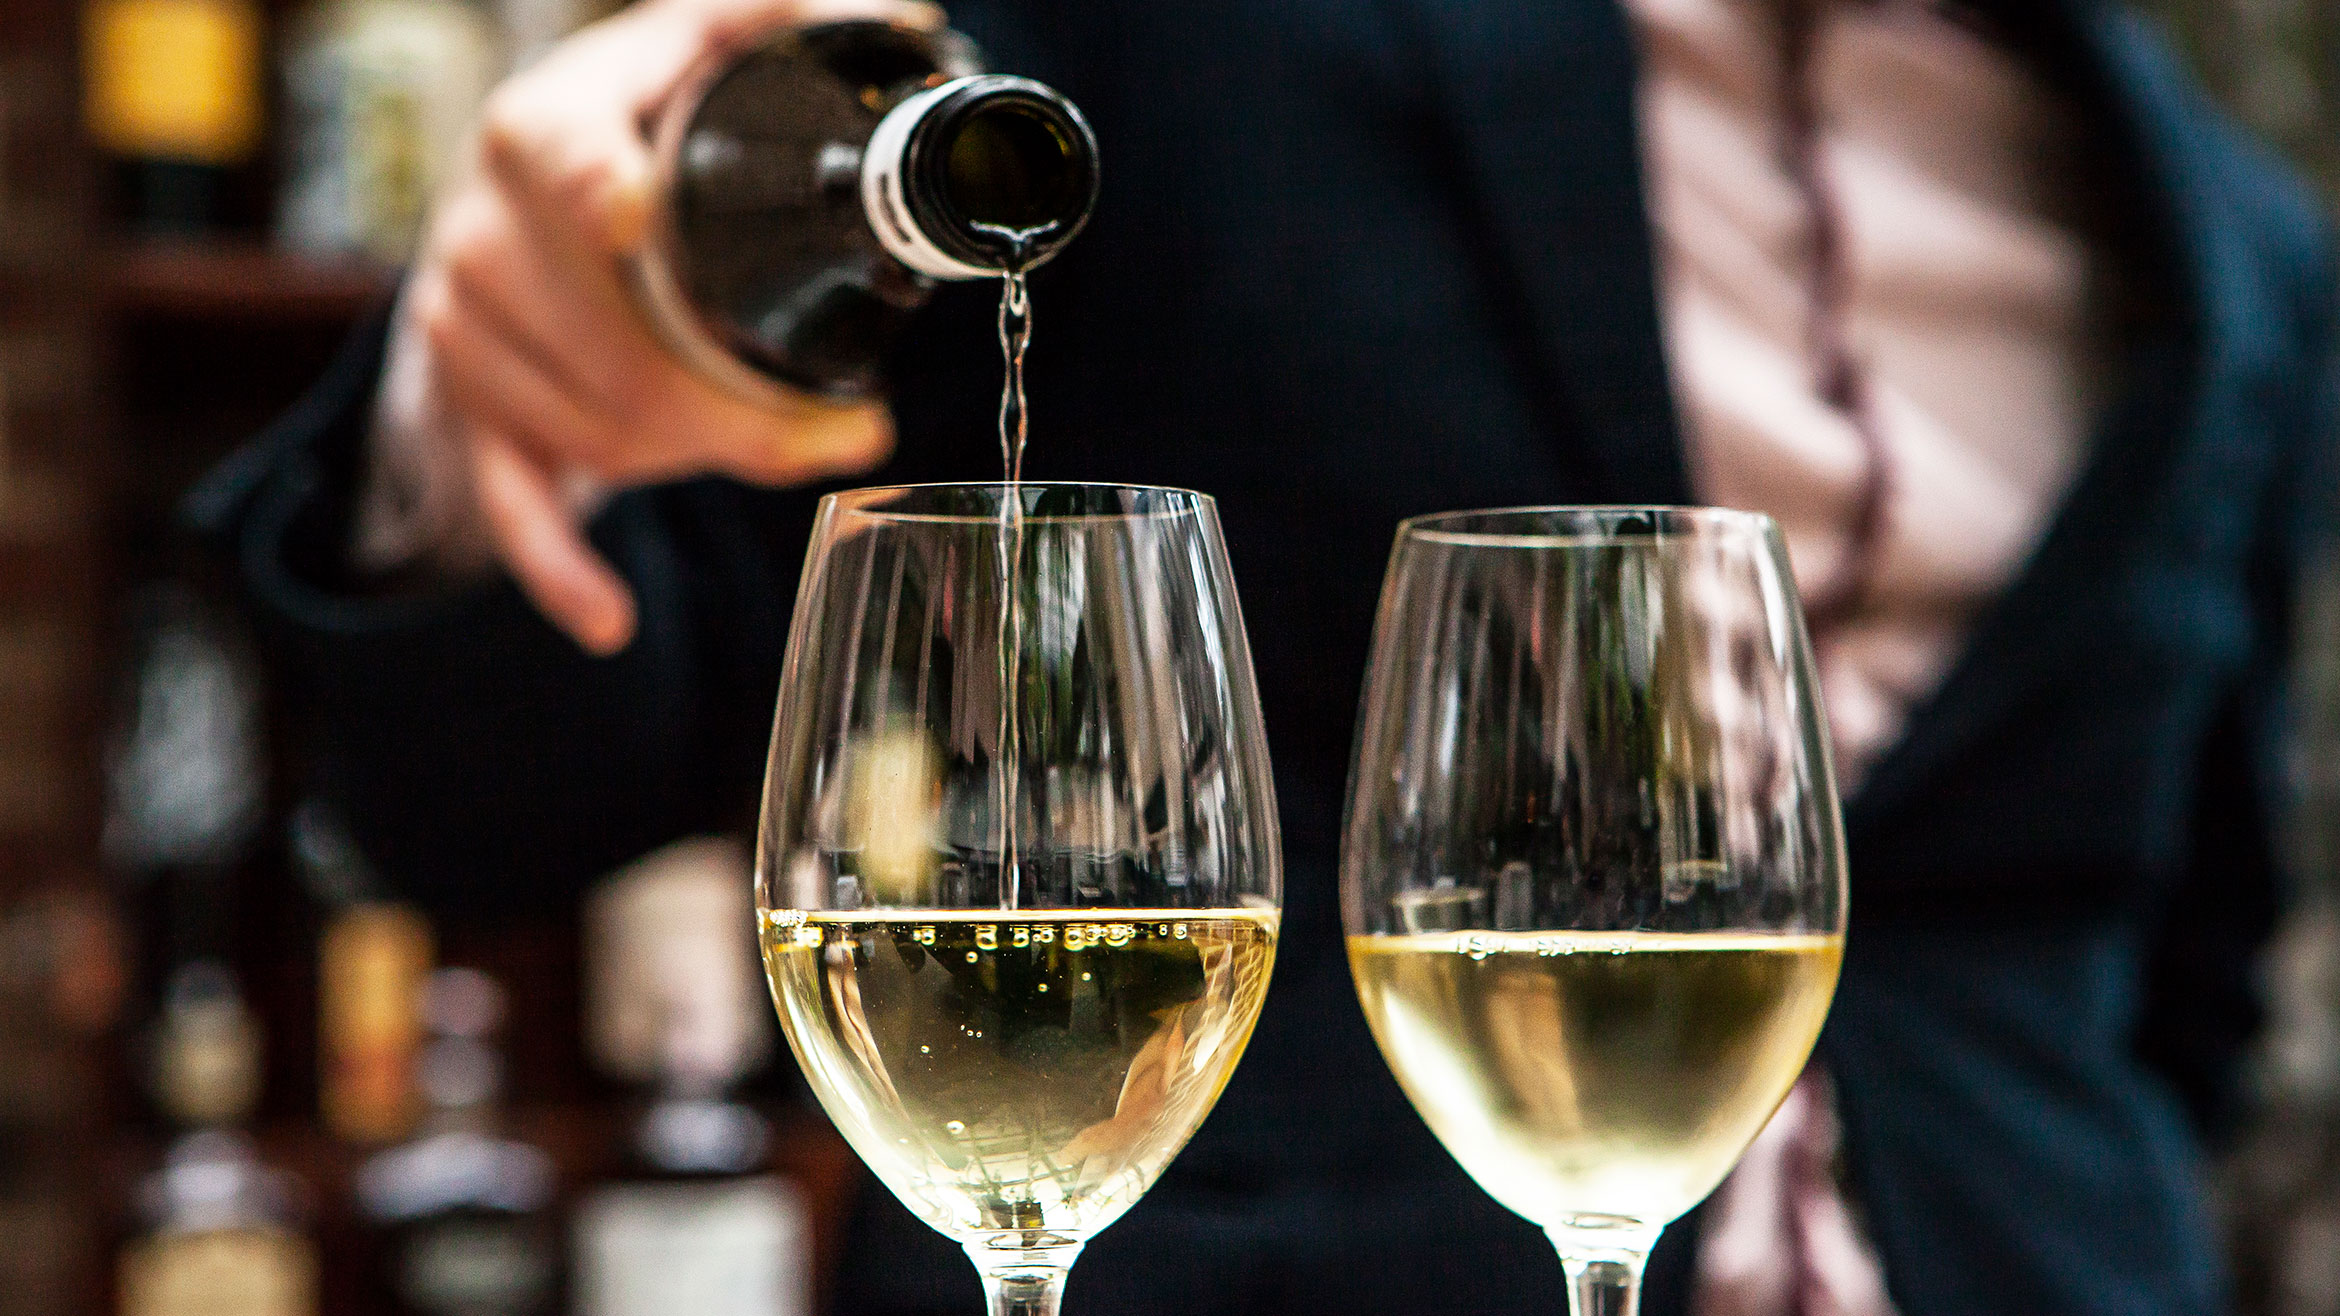 6 BEST WINES TO PAIR WITH ITALIAN FOOD TO APPRECIATE YOUR MEAL